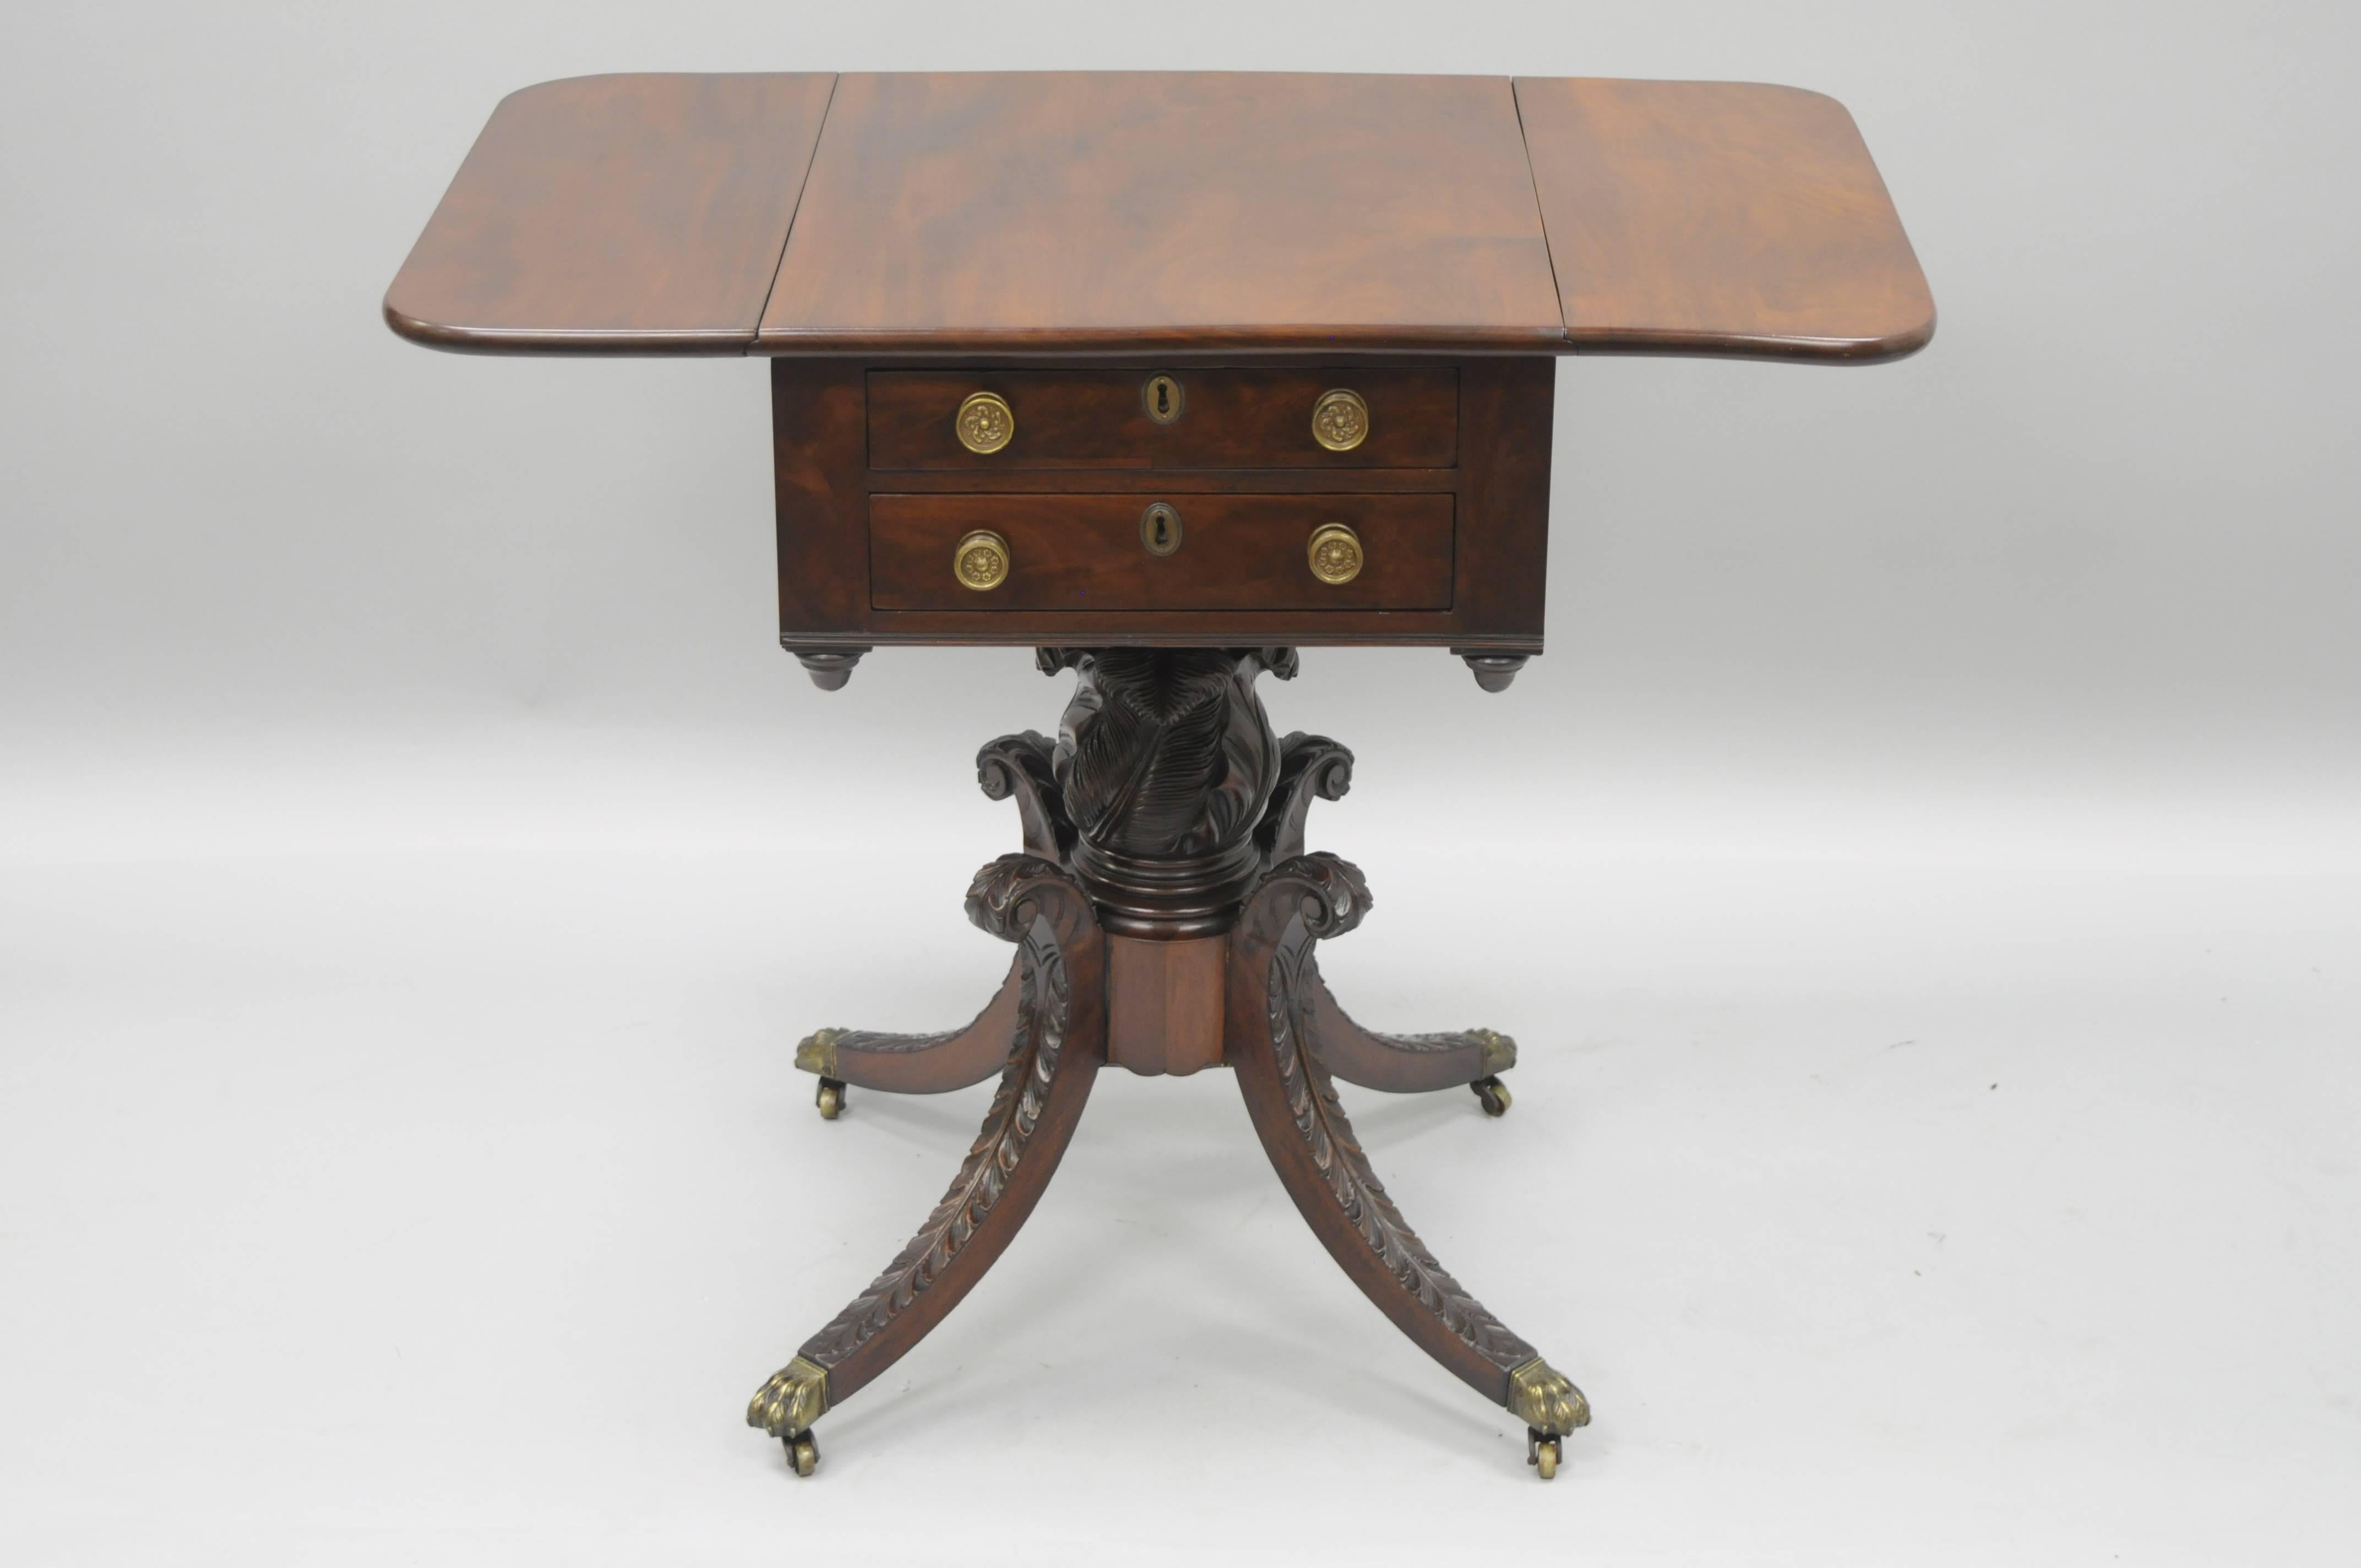 Antique early to mid 19th century regency / empire carved mahogany drop-leaf two-drawer side table with faux drawers at the rear. Table features a solid mahogany wood top with beautiful wood grain, drop sides, and two hand dovetailed drawers at the